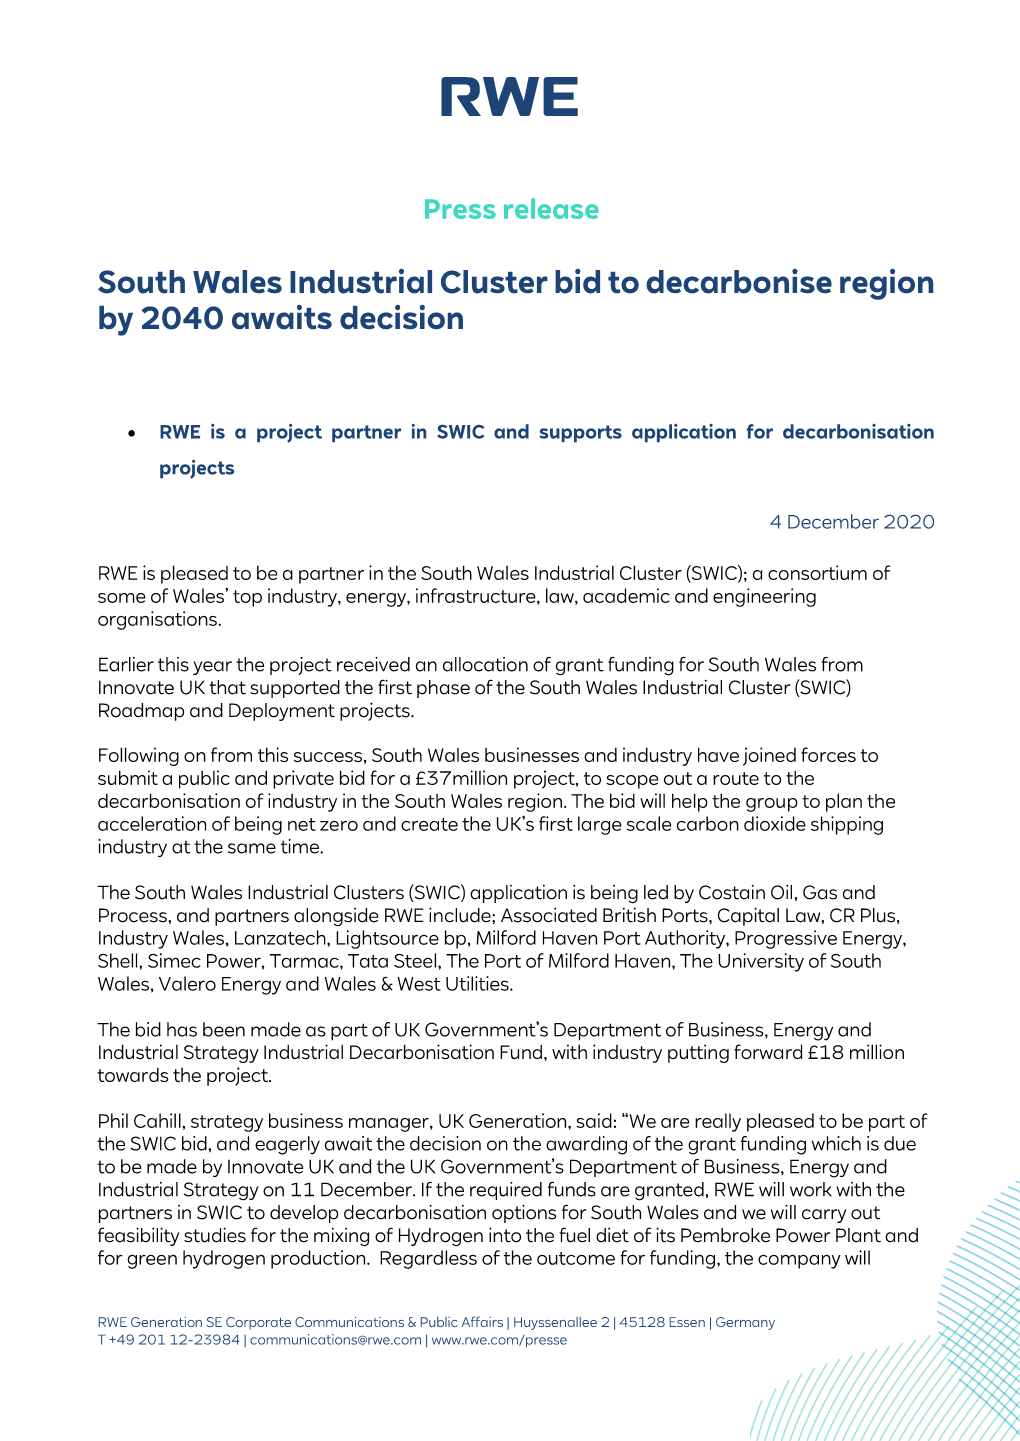 South Wales Industrial Cluster Bid to Decarbonise Region by 2040 Awaits Decision